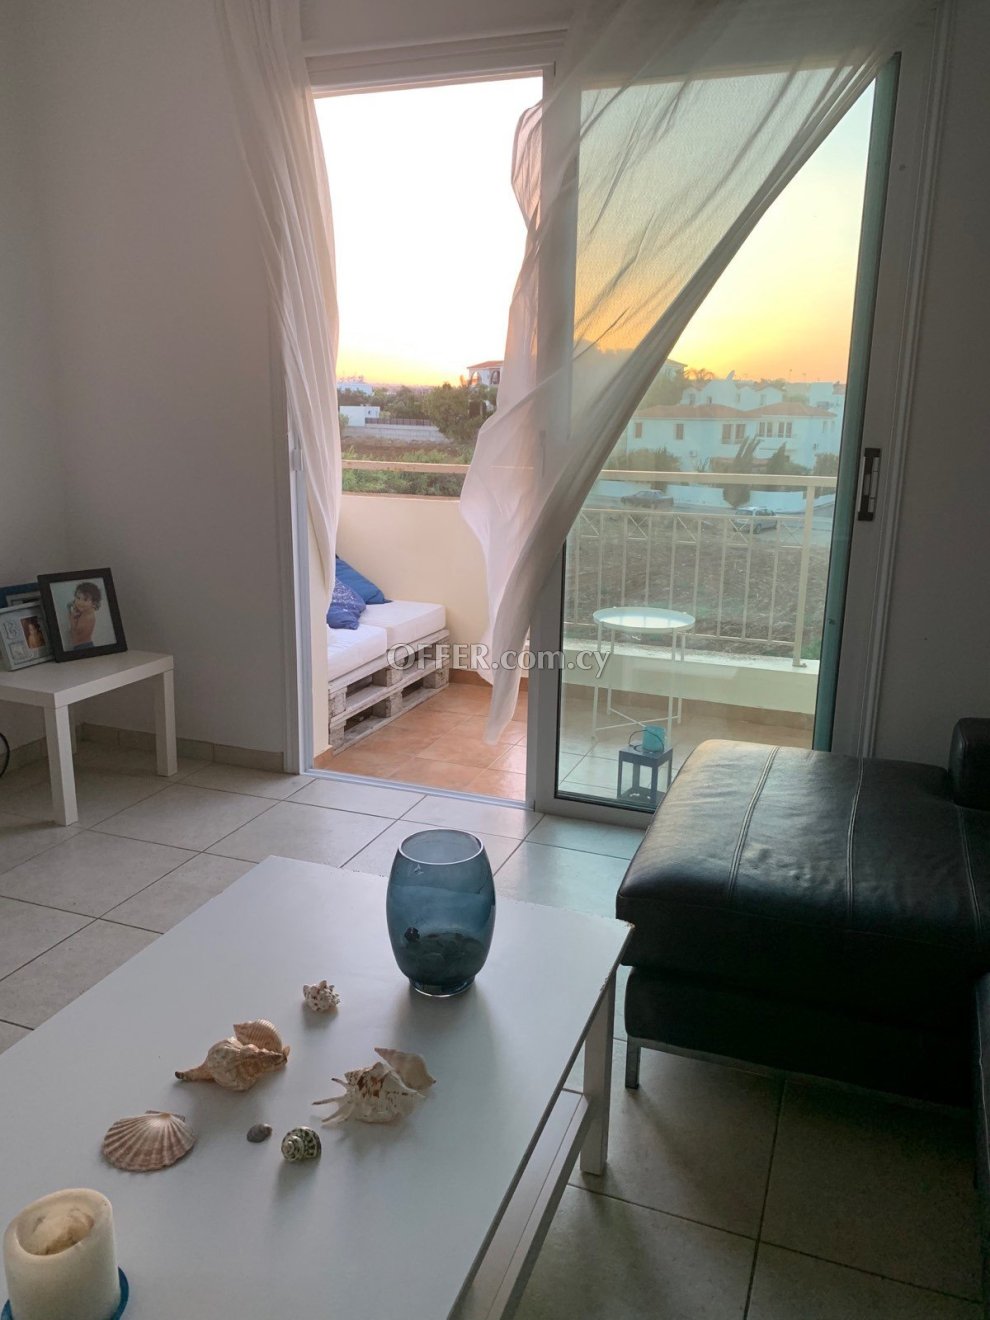 Apartment (Penthouse) in Pernera, Famagusta for Sale - 3